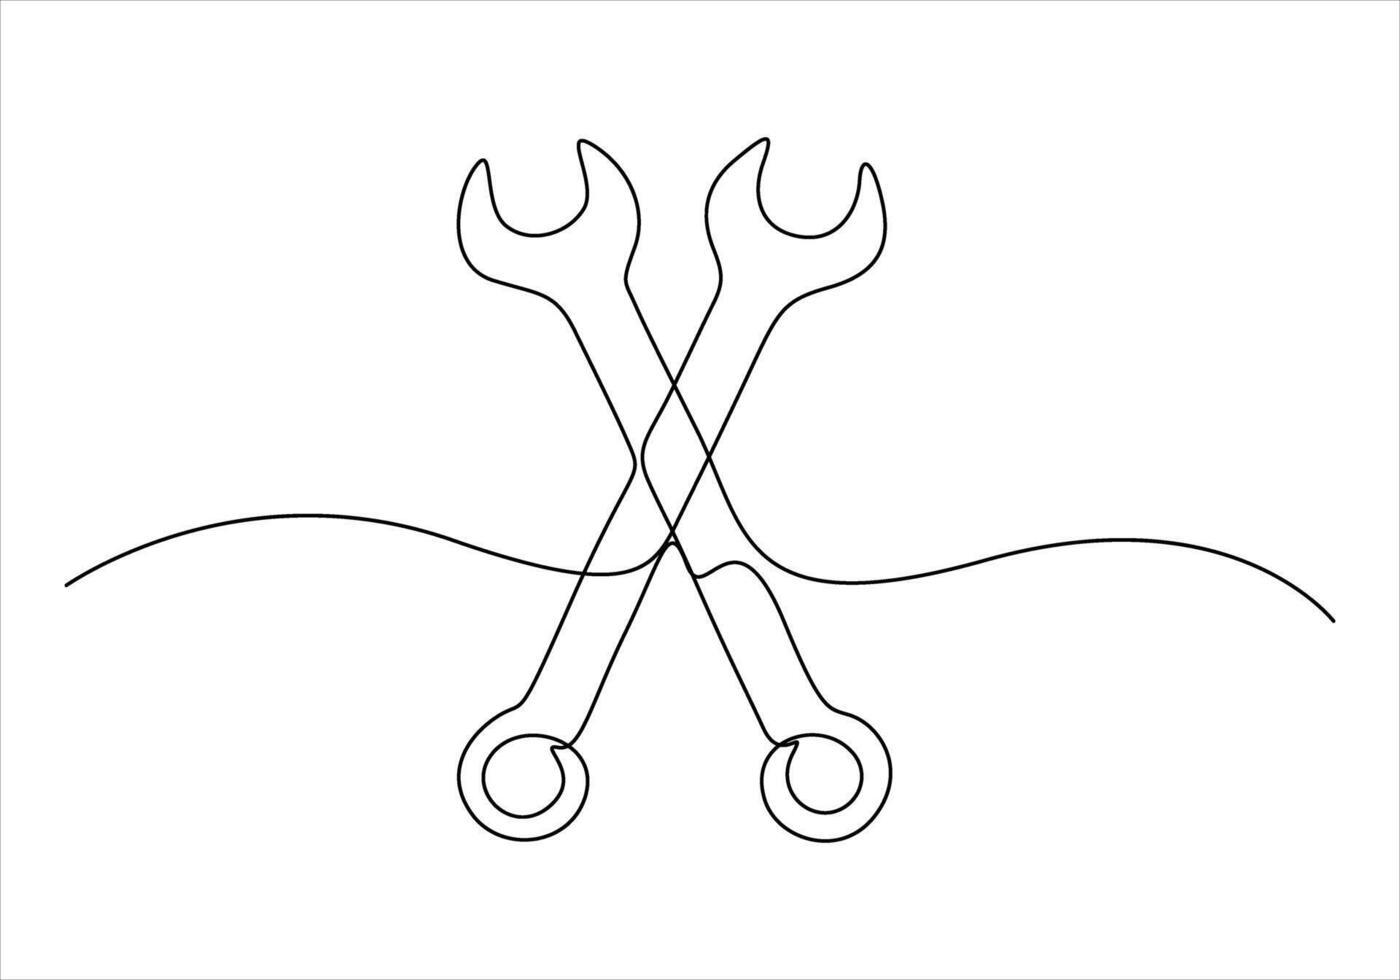 Continuous one line drawing of repair icon. Two crossed wrenches. Auto mechanic car repair shop logo with wings. Vector illustration